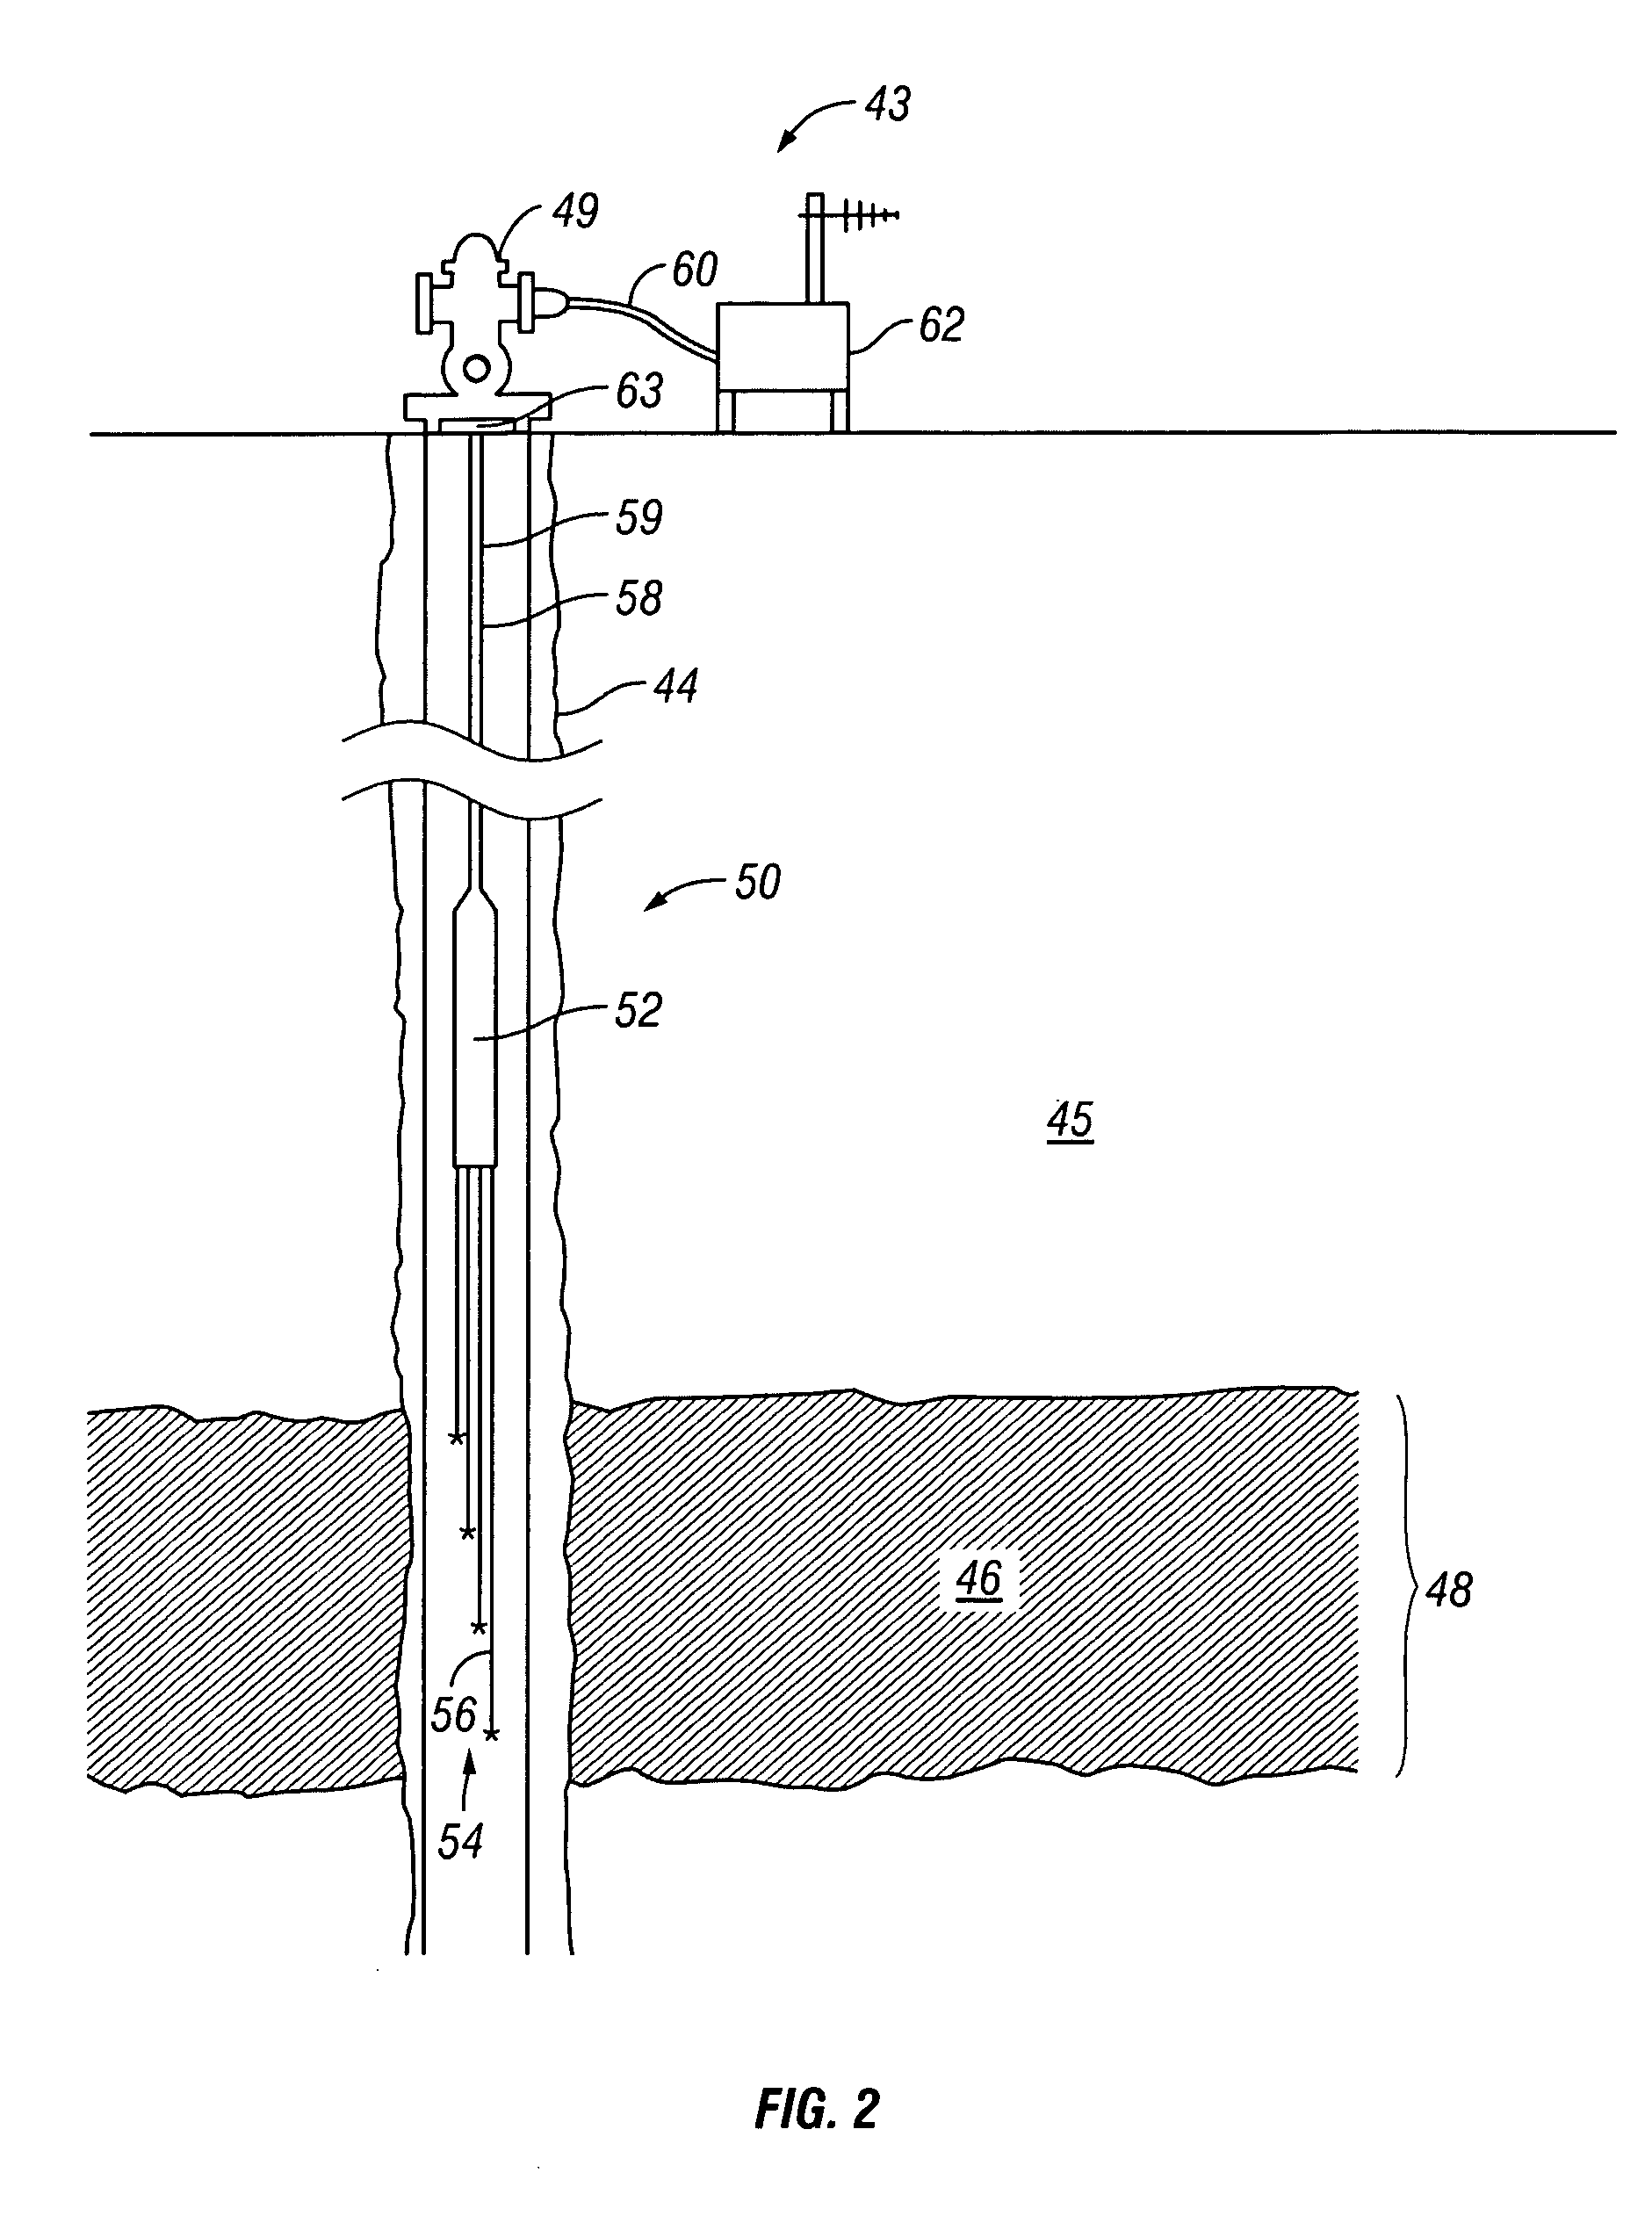 Systems and methods for acquiring data in thermal recovery oil wells